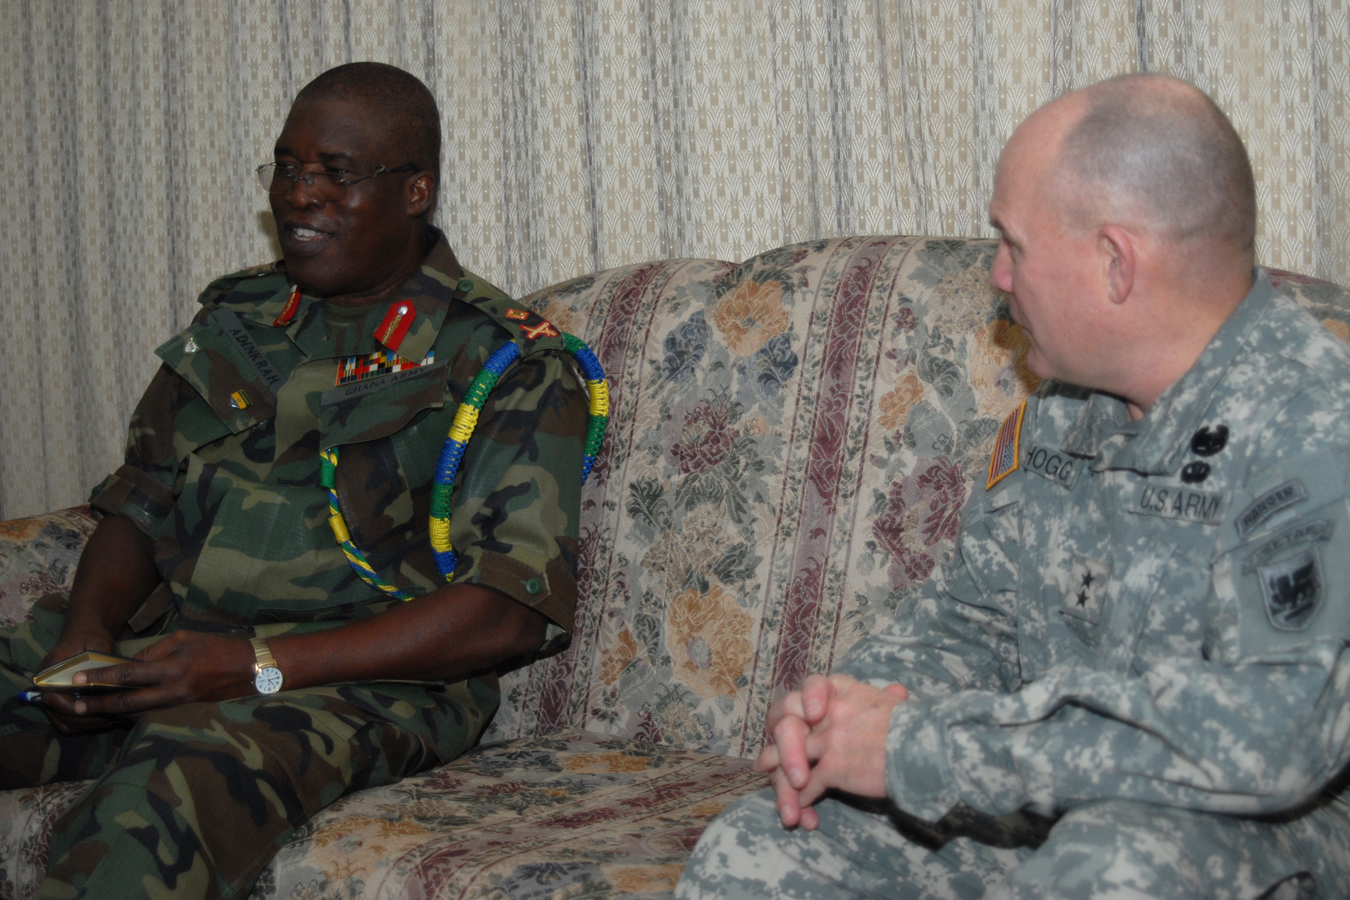 man in uniform sitting on a couch talking with another man